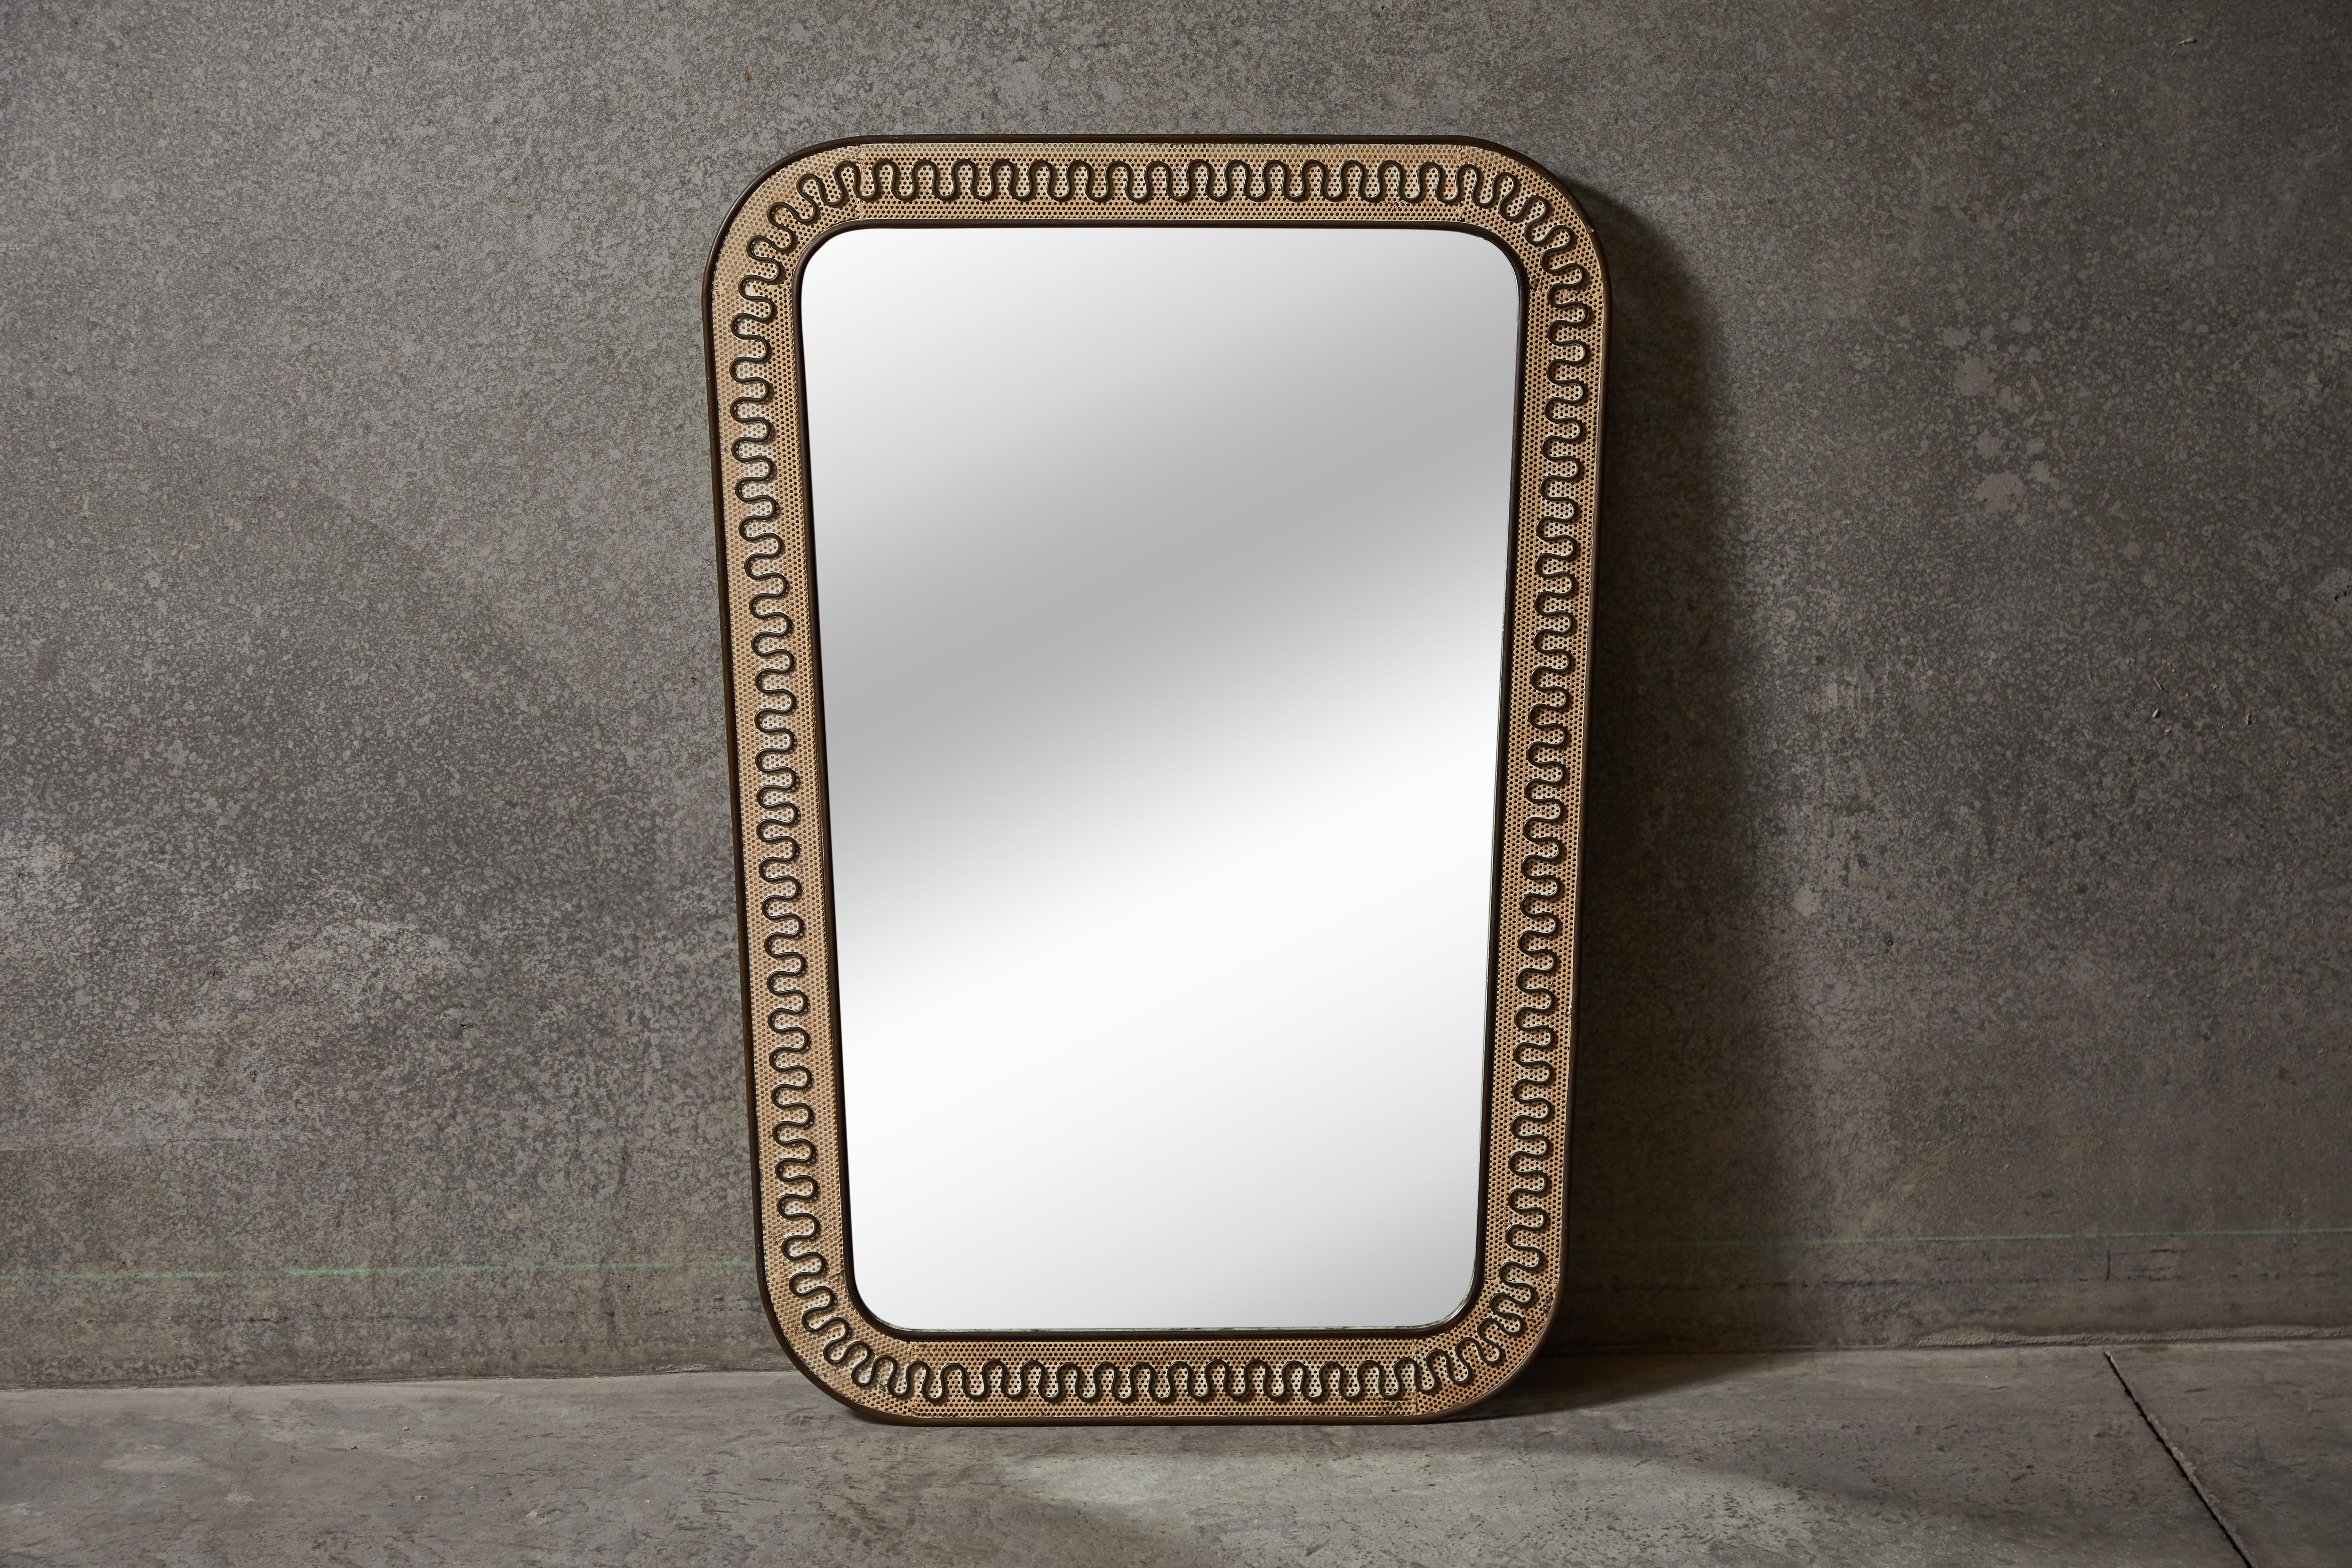 Italian brass and perforated metal mirror by Carlo Erba. Made in Italy, circa 1950s.